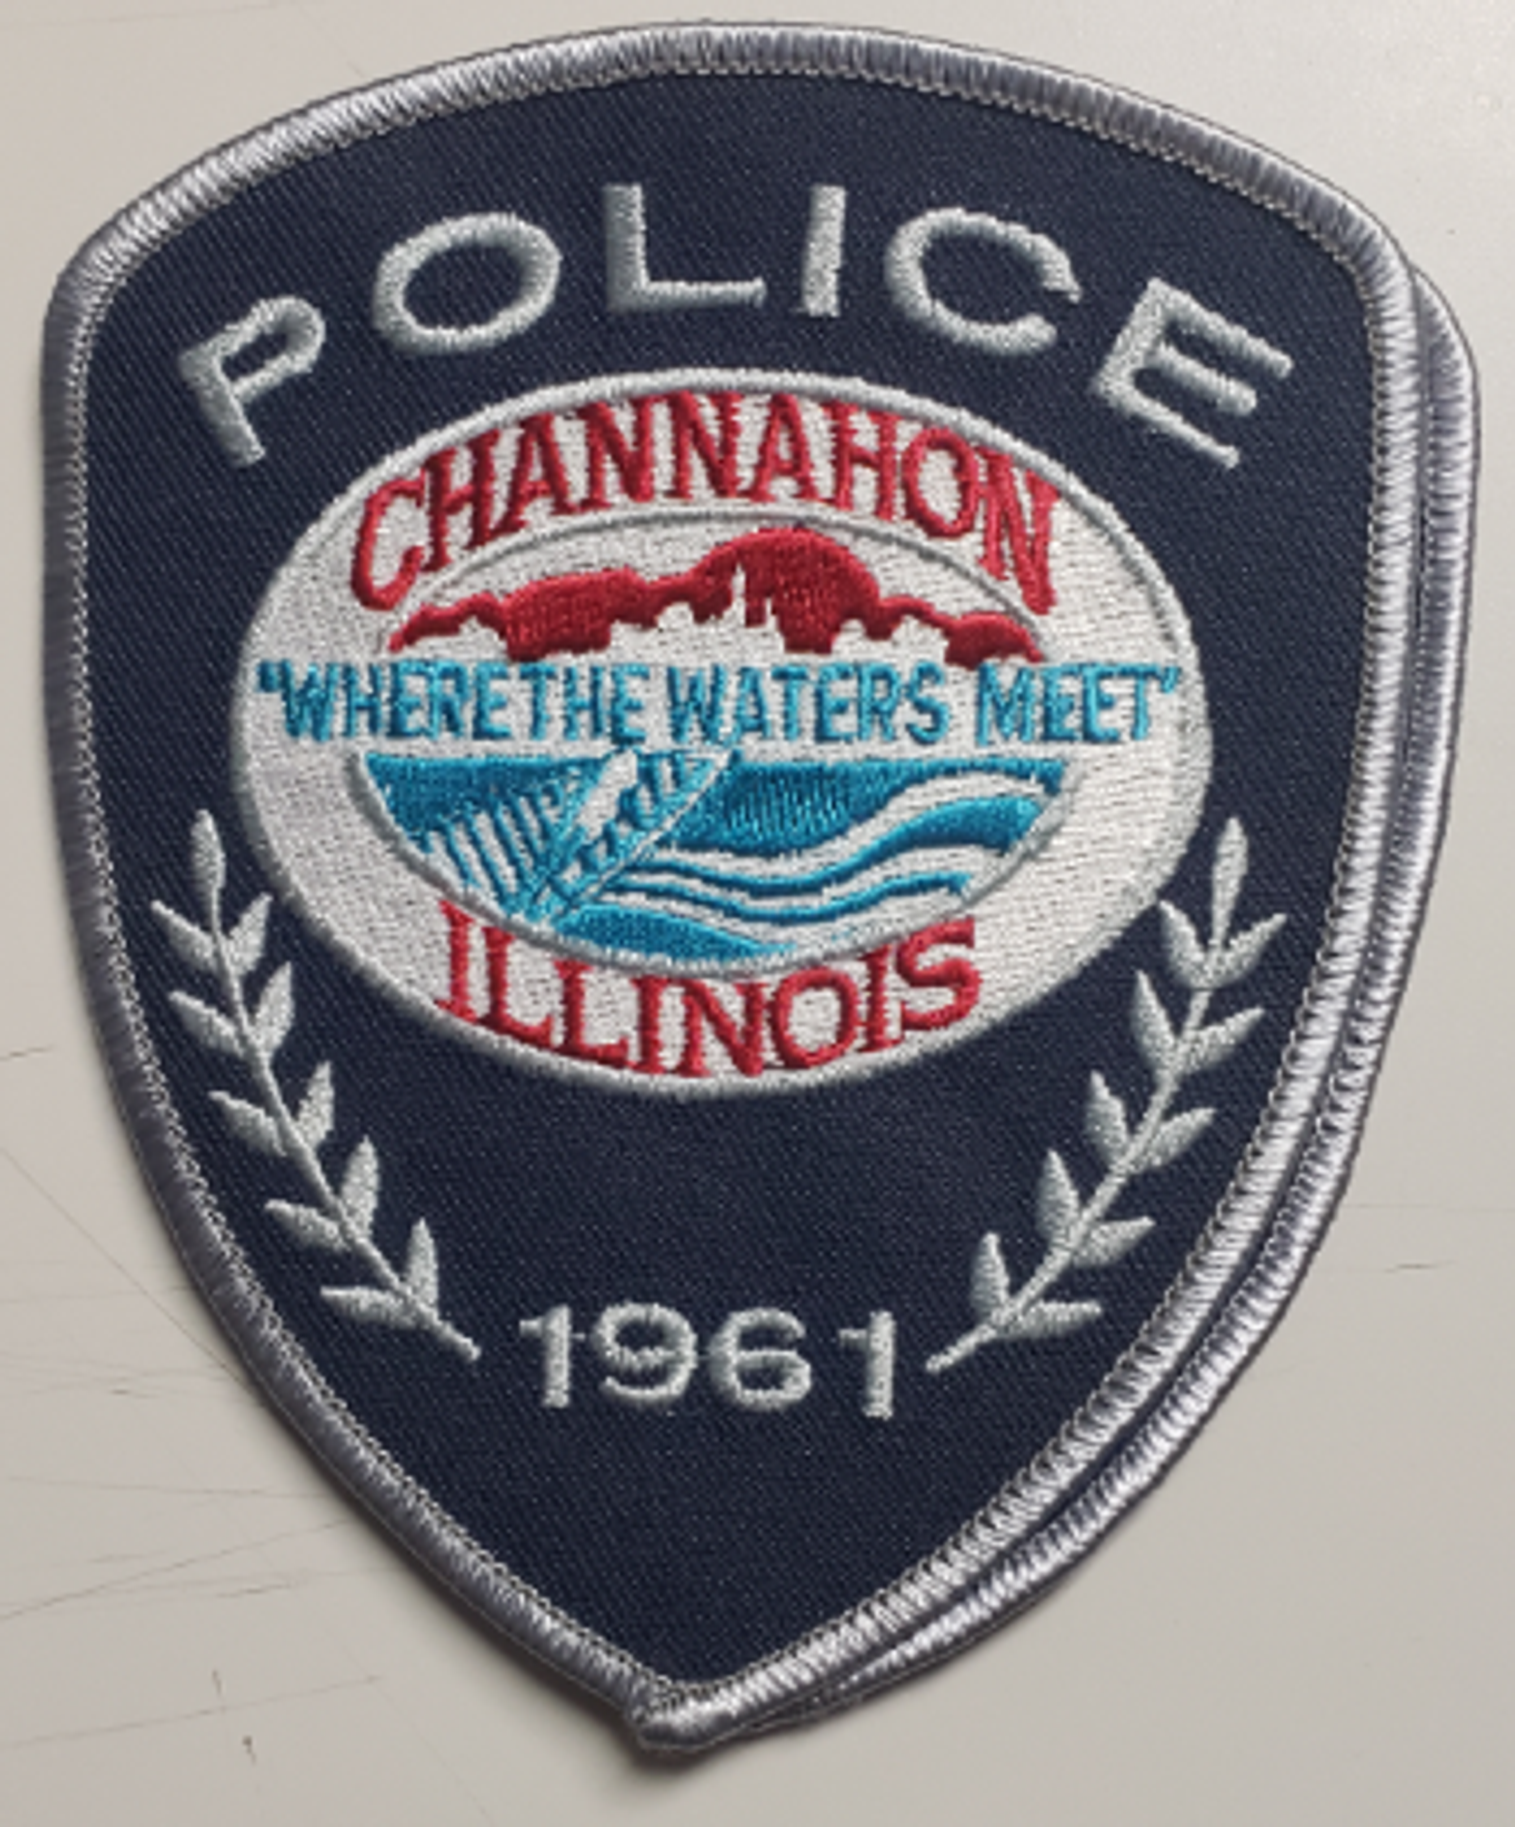 Channahon IL Police Patch